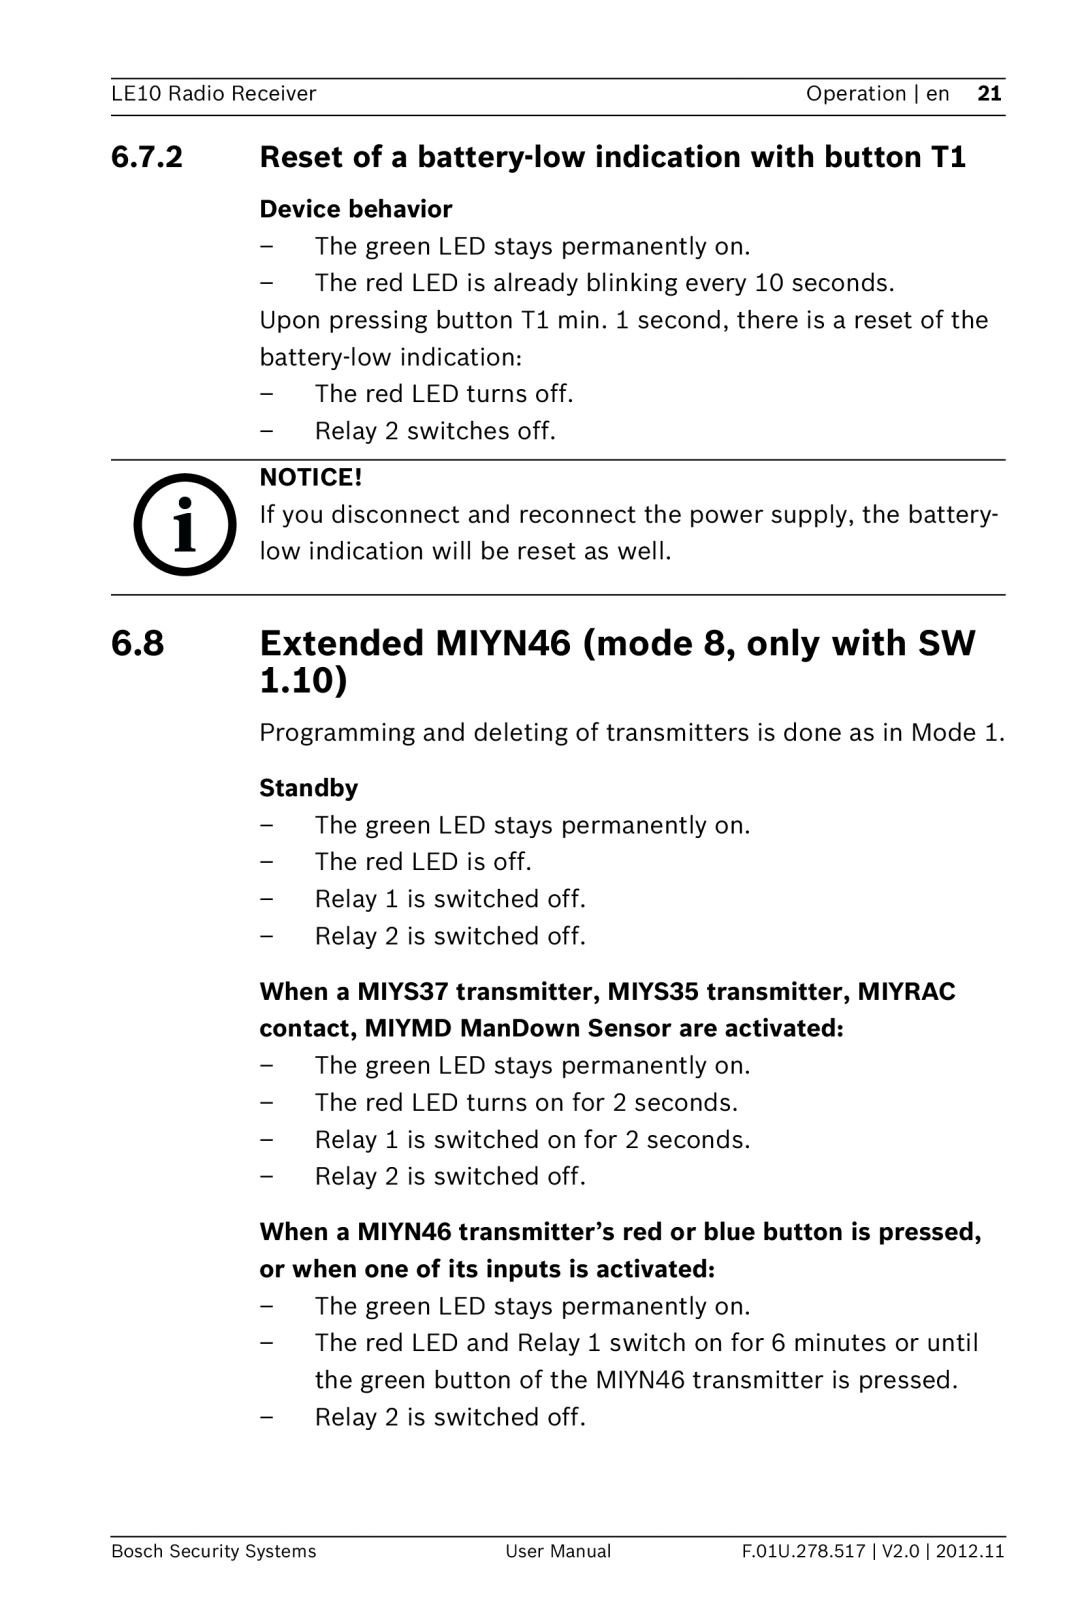 Bosch Appliances LE10 user manual 6.8Extended MIYN46 mode 8, only with SW, Standby, Device behavior 